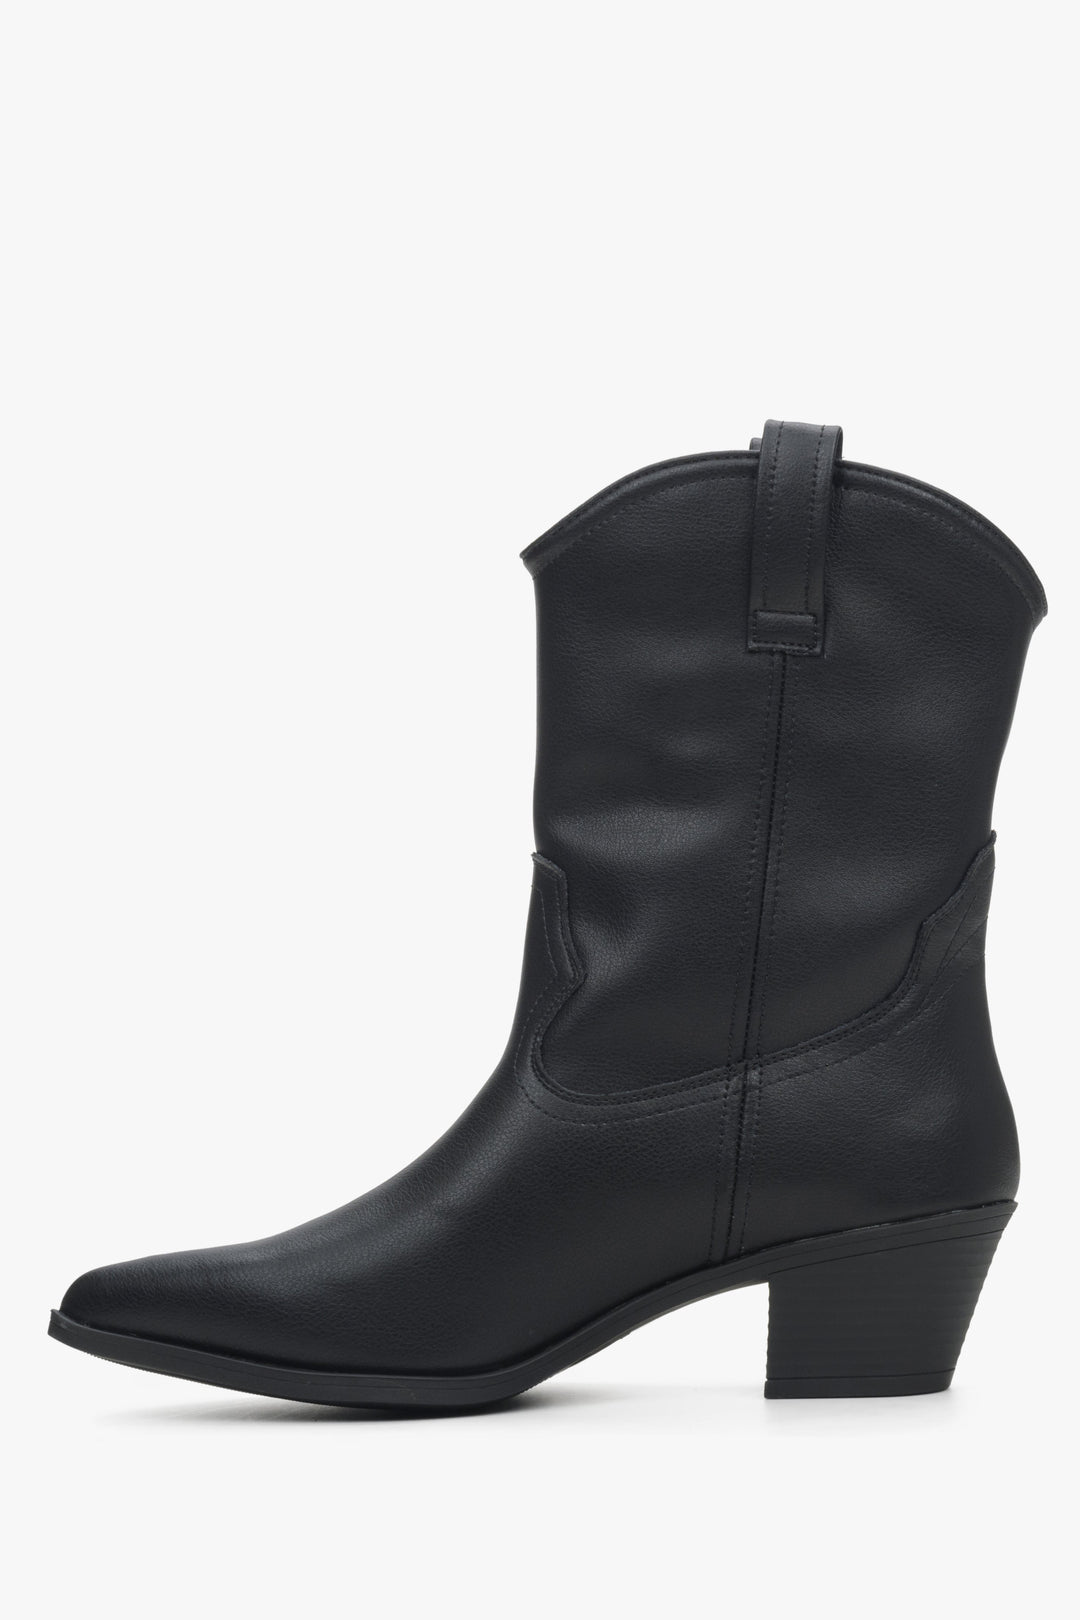 Women's black low-cut cowboy boots made of genuine leather by Estro - shoe profile.